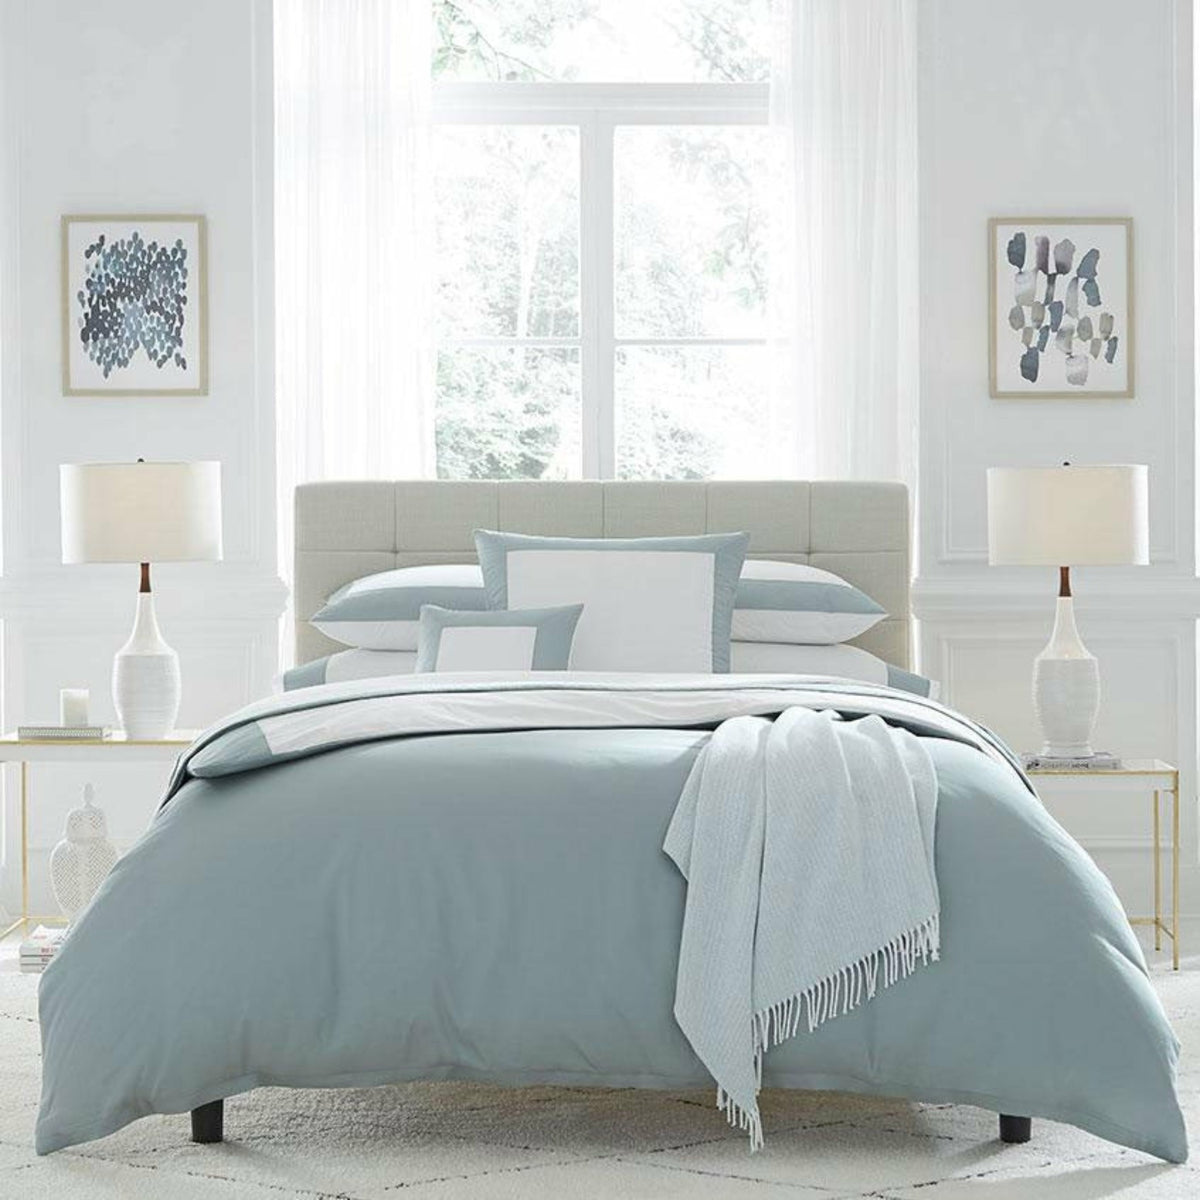 Full Lifestyle Image of Sferra Casida Bedding in Color White/Seagreen